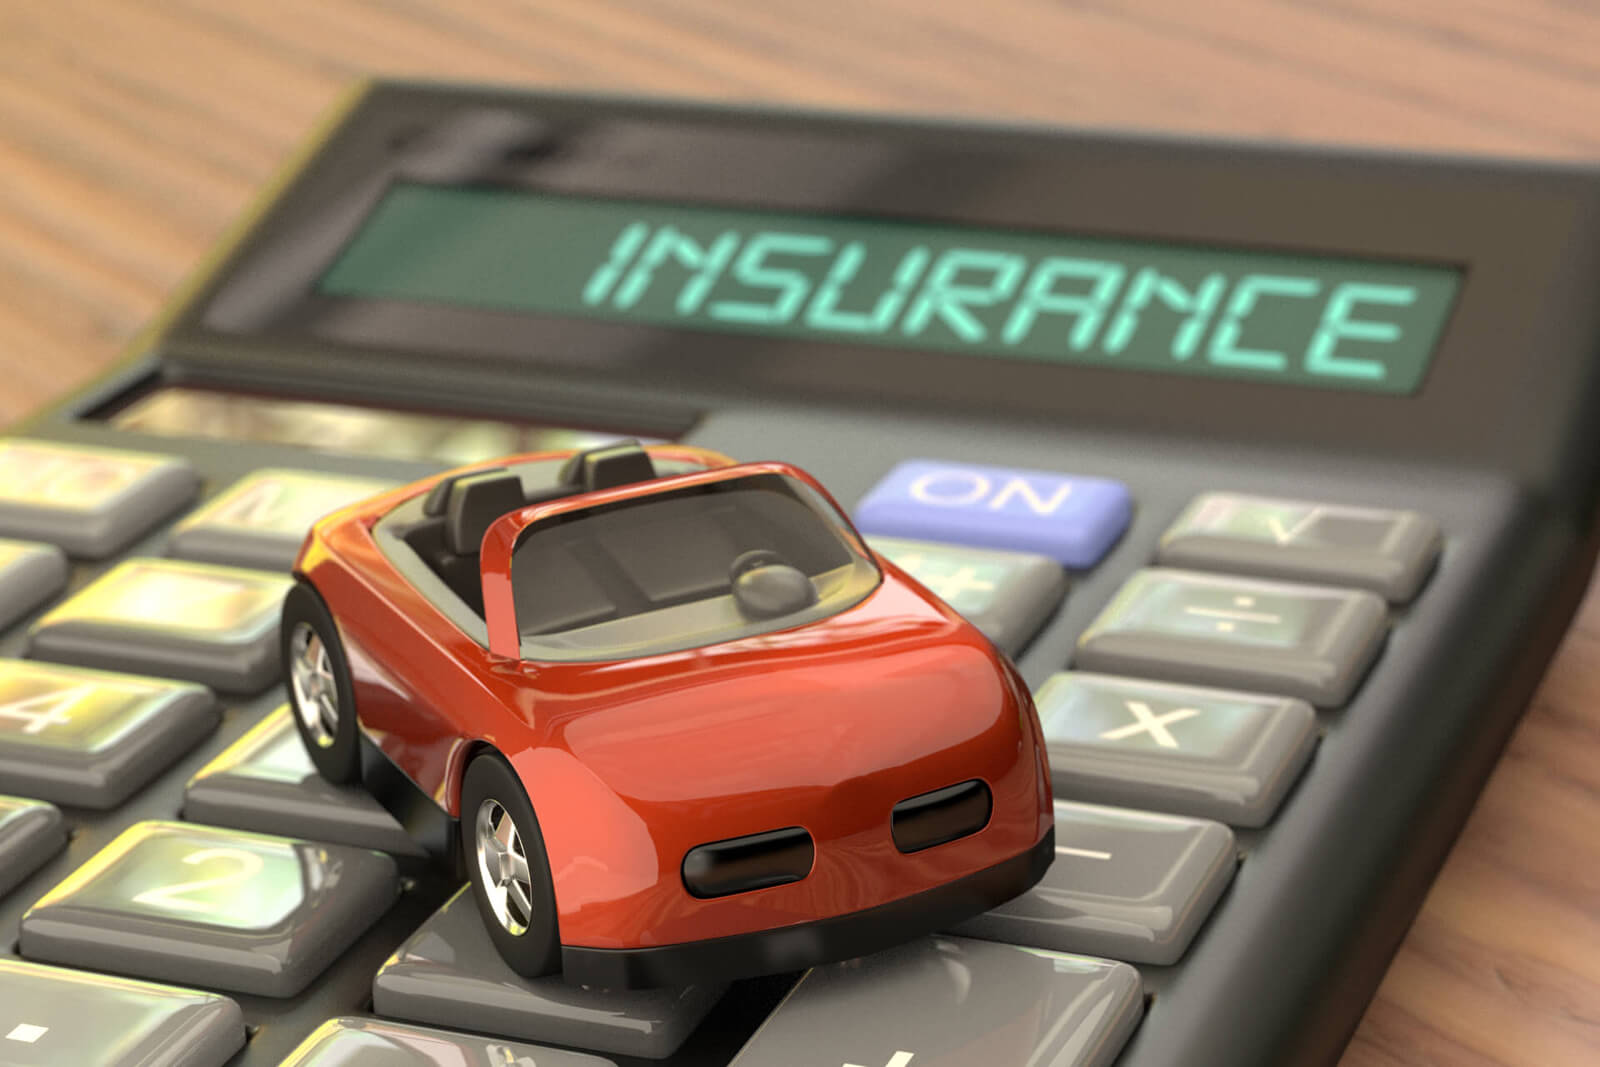 Can you carry auto insurance for a car if the title is not in your name?